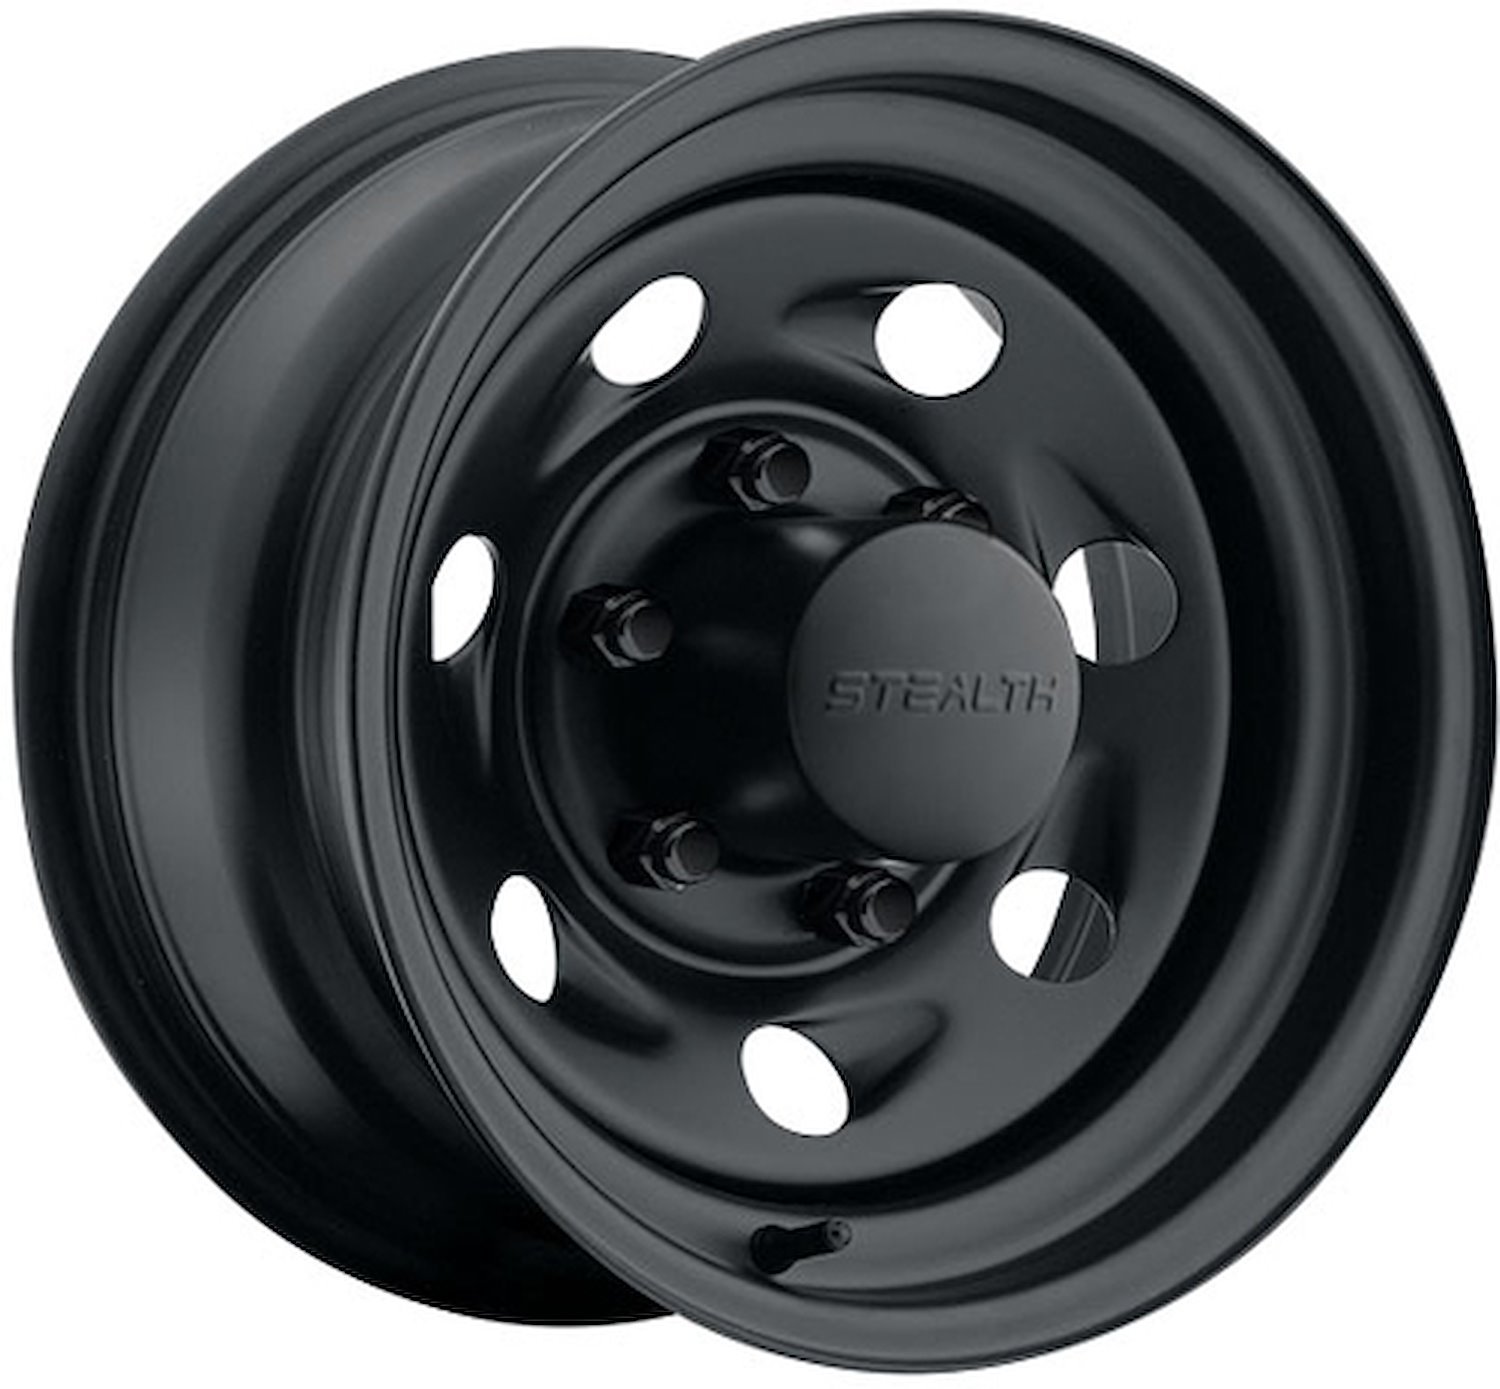 STEALTH BLACK VORTEC 15 x 7 6 x 55 Bolt Circle 4 Back Spacing 0 offset 428 Center Bore 1600 lbs Load Rating